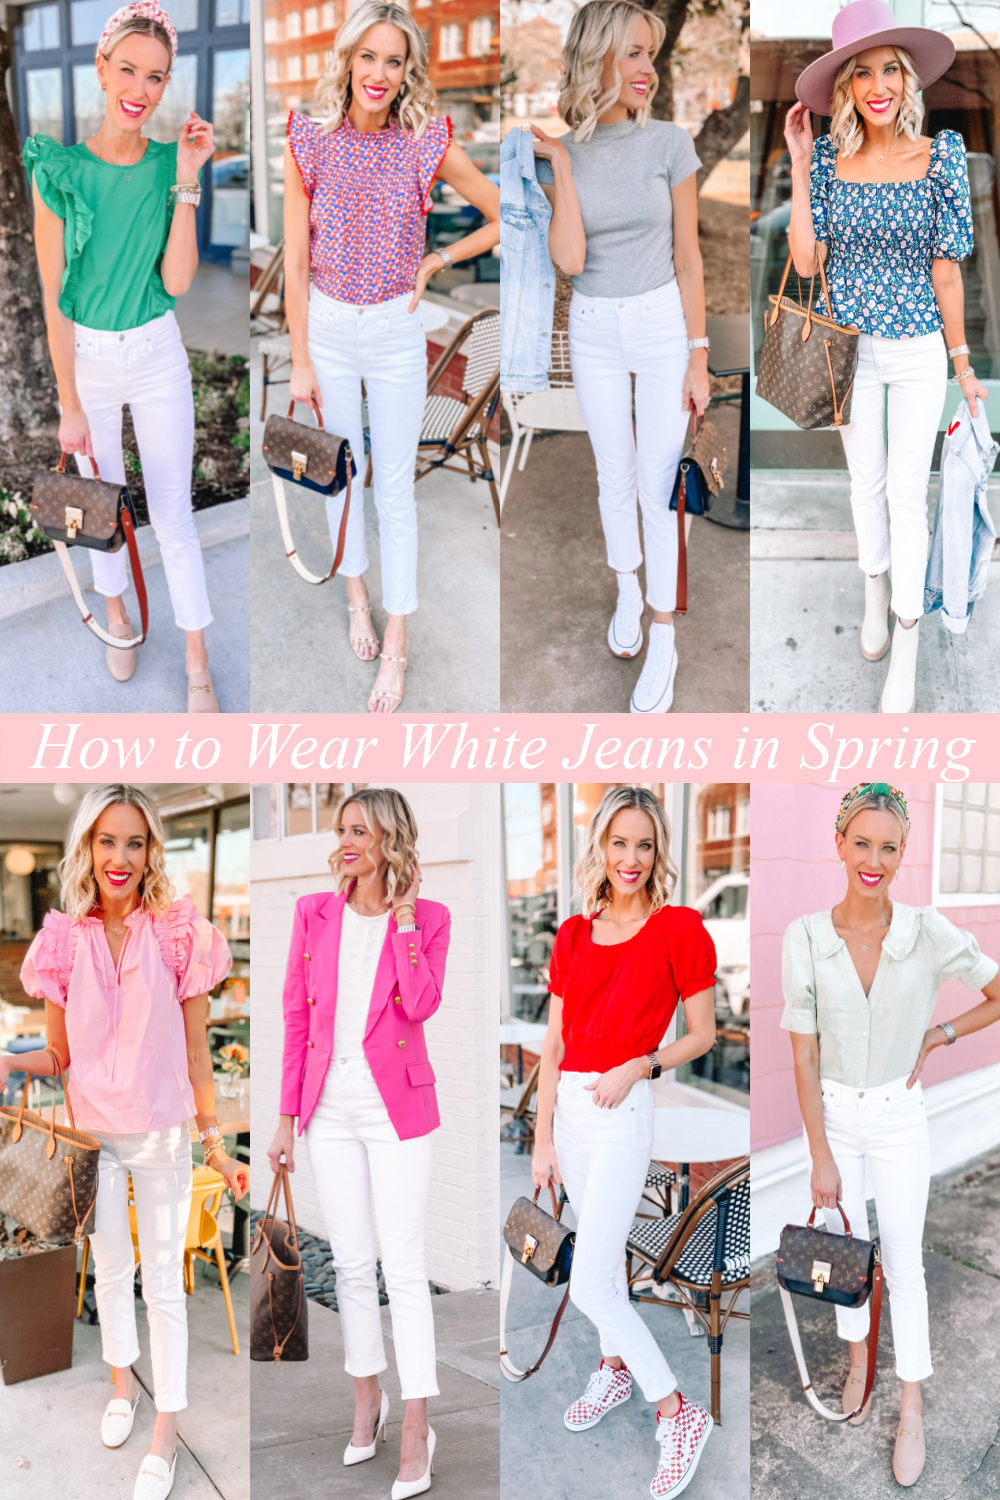 White Hot: What Color Shoes to Wear with White Pants (Feminine Looks)